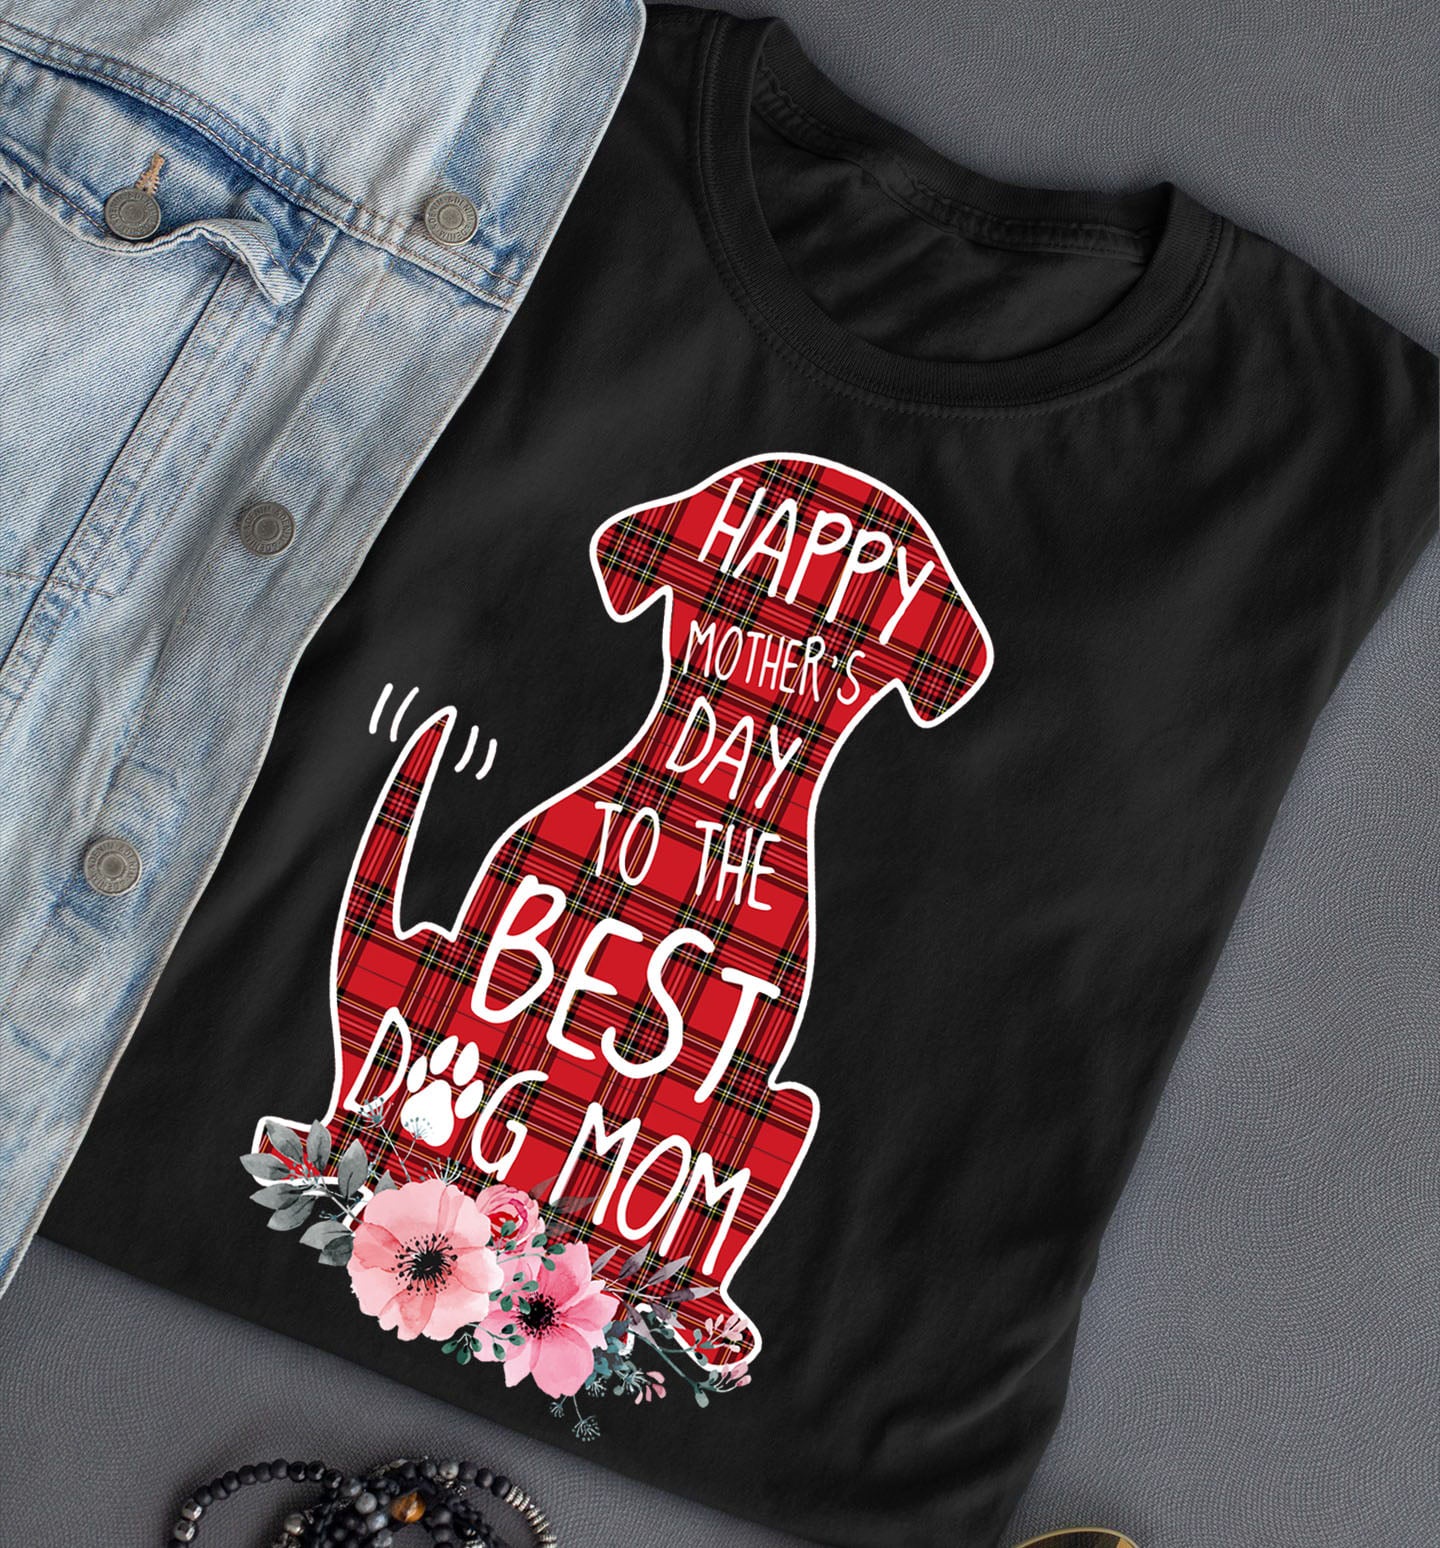 Happy Mother's Day To The Best Dog Mom T Shirt Hoodie, Meaningful Mother’s Day Gift, Happy Mother’s Day Ideas 1617090037659.jpg